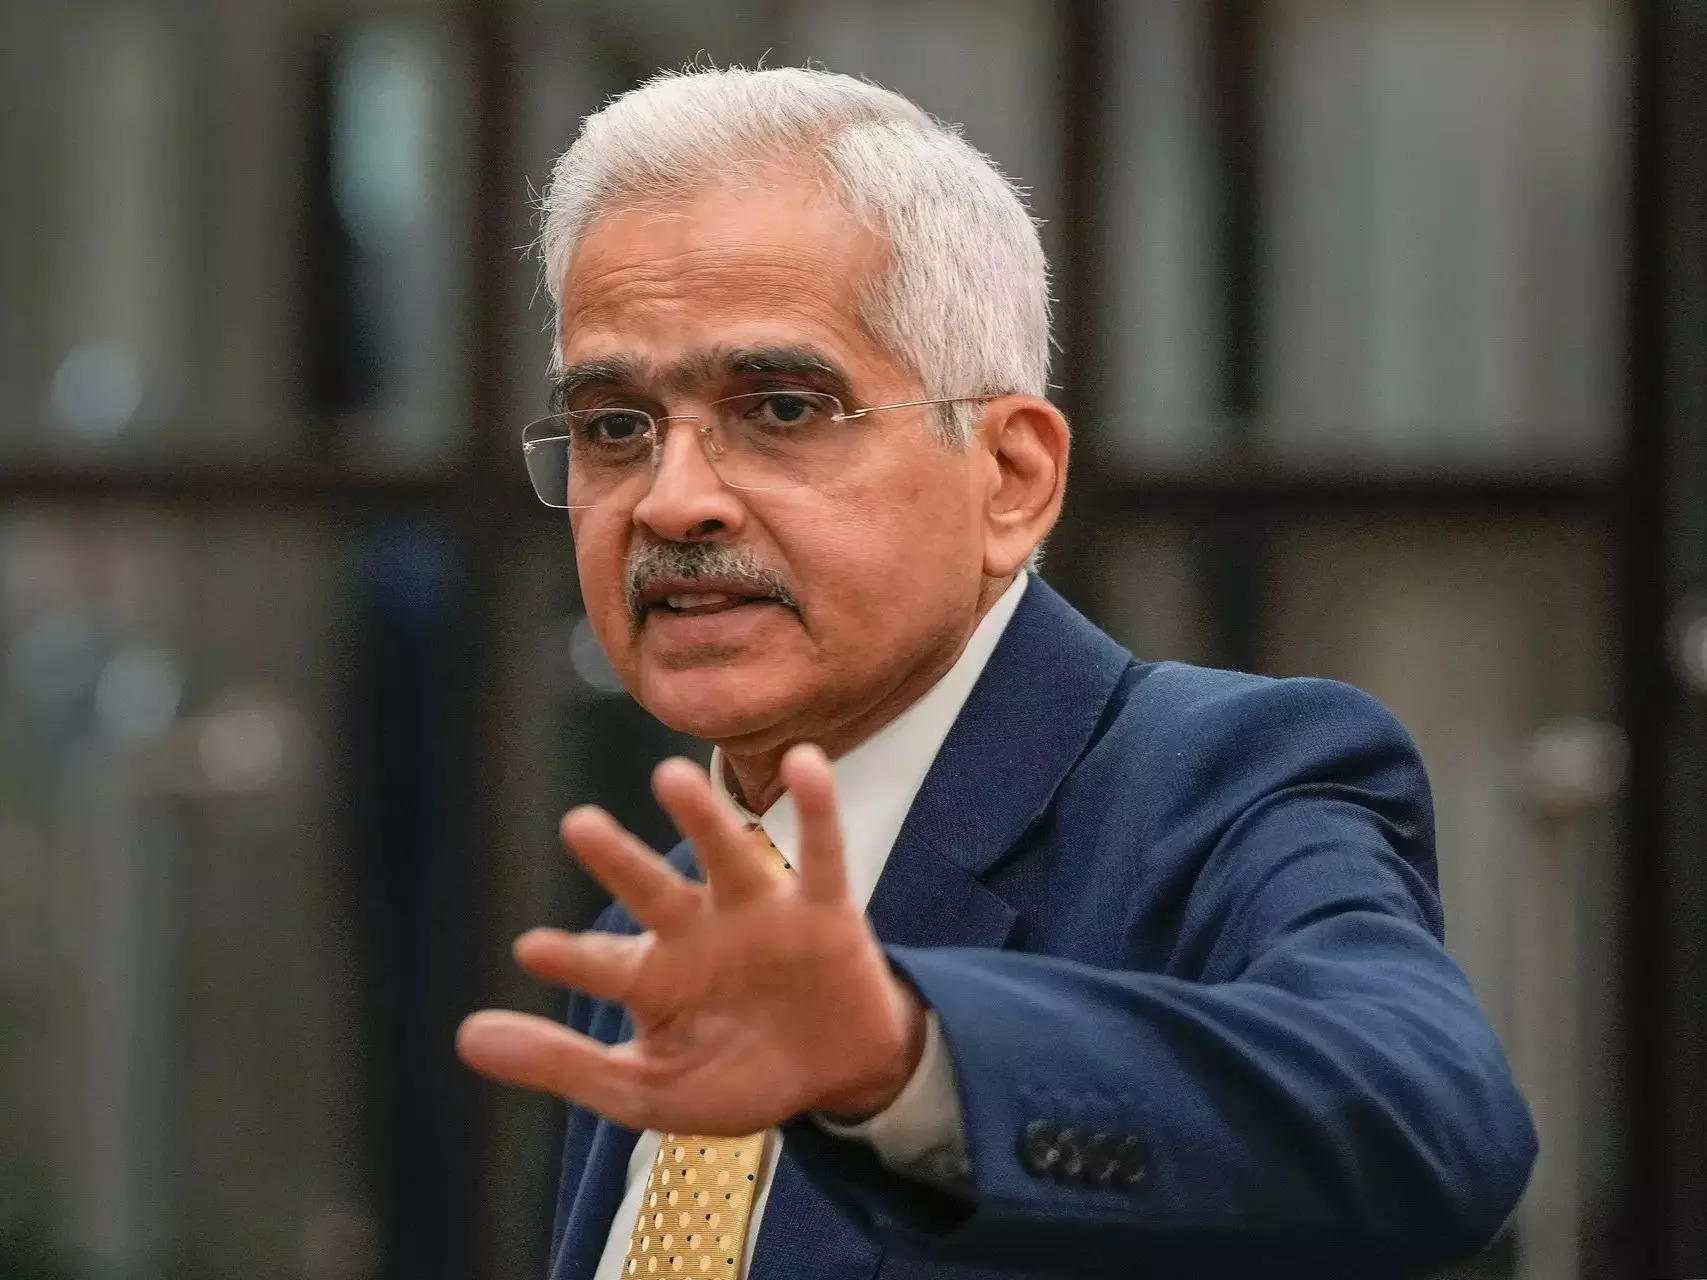 Slower deposit growth may create structural liquidity issues for banks, says Shaktikanta Das 